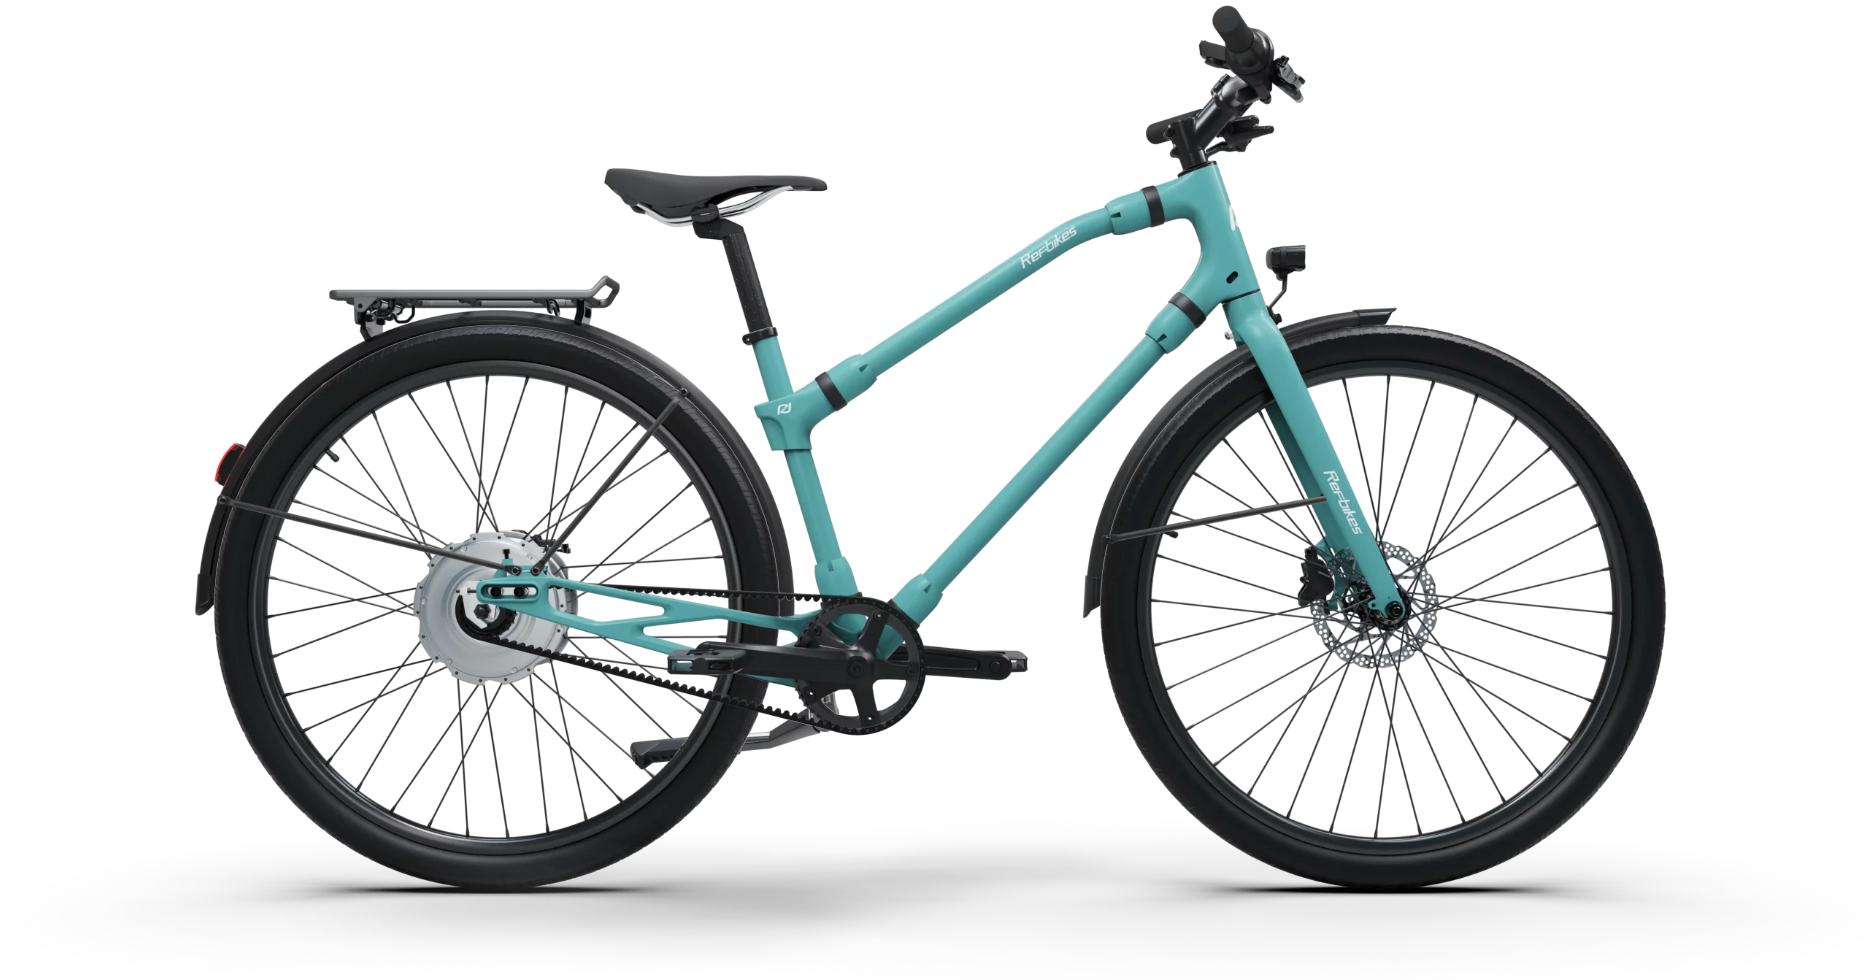 Bright blue Ref Urban Boost bike with a dynamic electric assist system for urban travel.